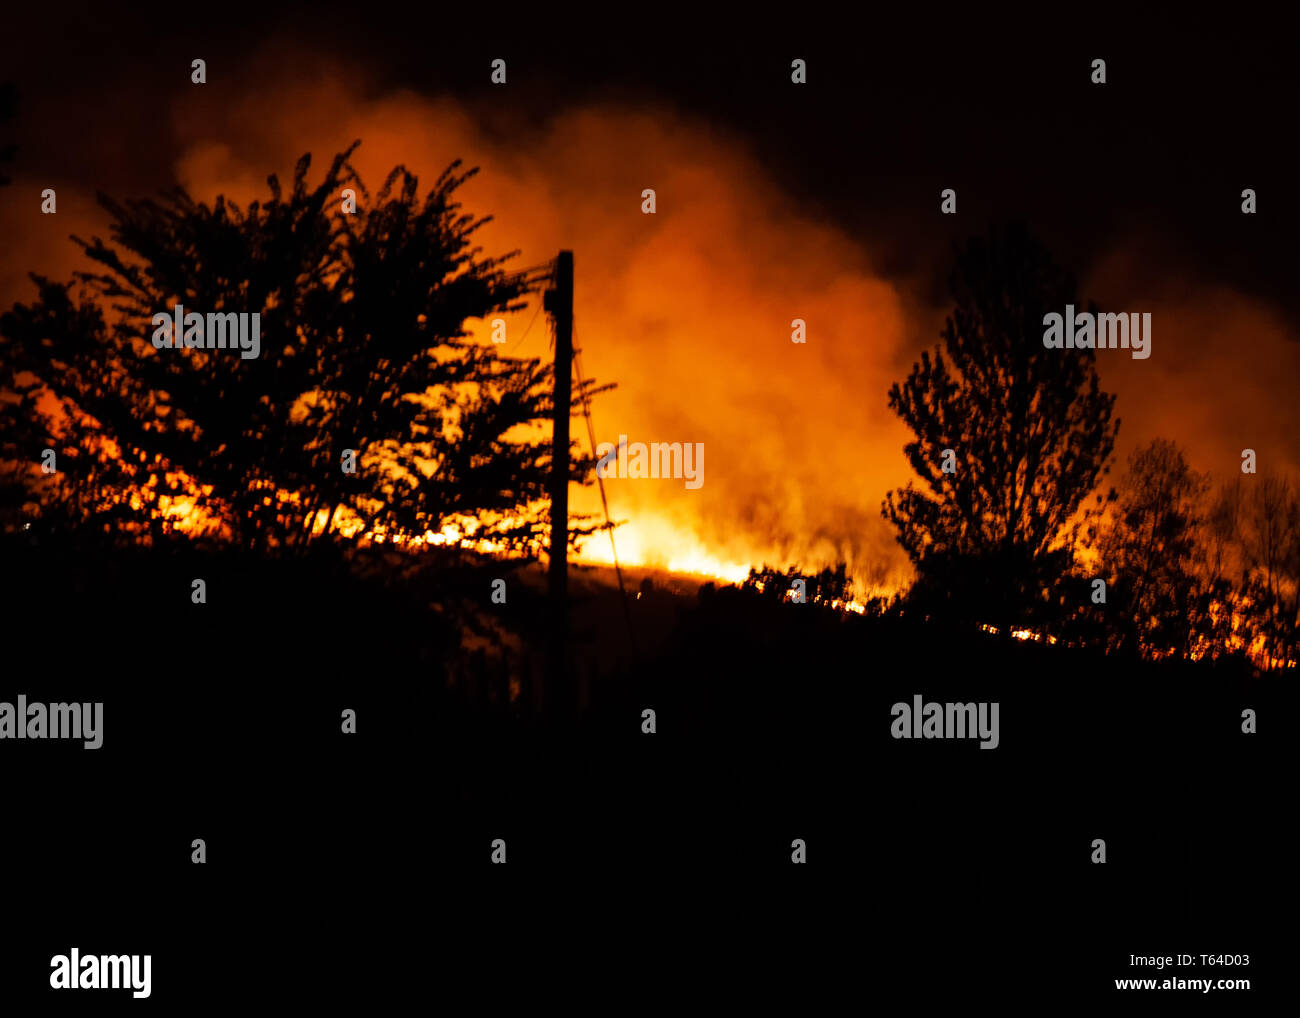 Ashdown Forest, Sussex UK 28th April 2019. Fire crews from across Sussex are dealing with a large forest fire in the South Downs National Park. Crews were alerted shortly after 9.30pm. SEUK News/Alamy Live News Stock Photo